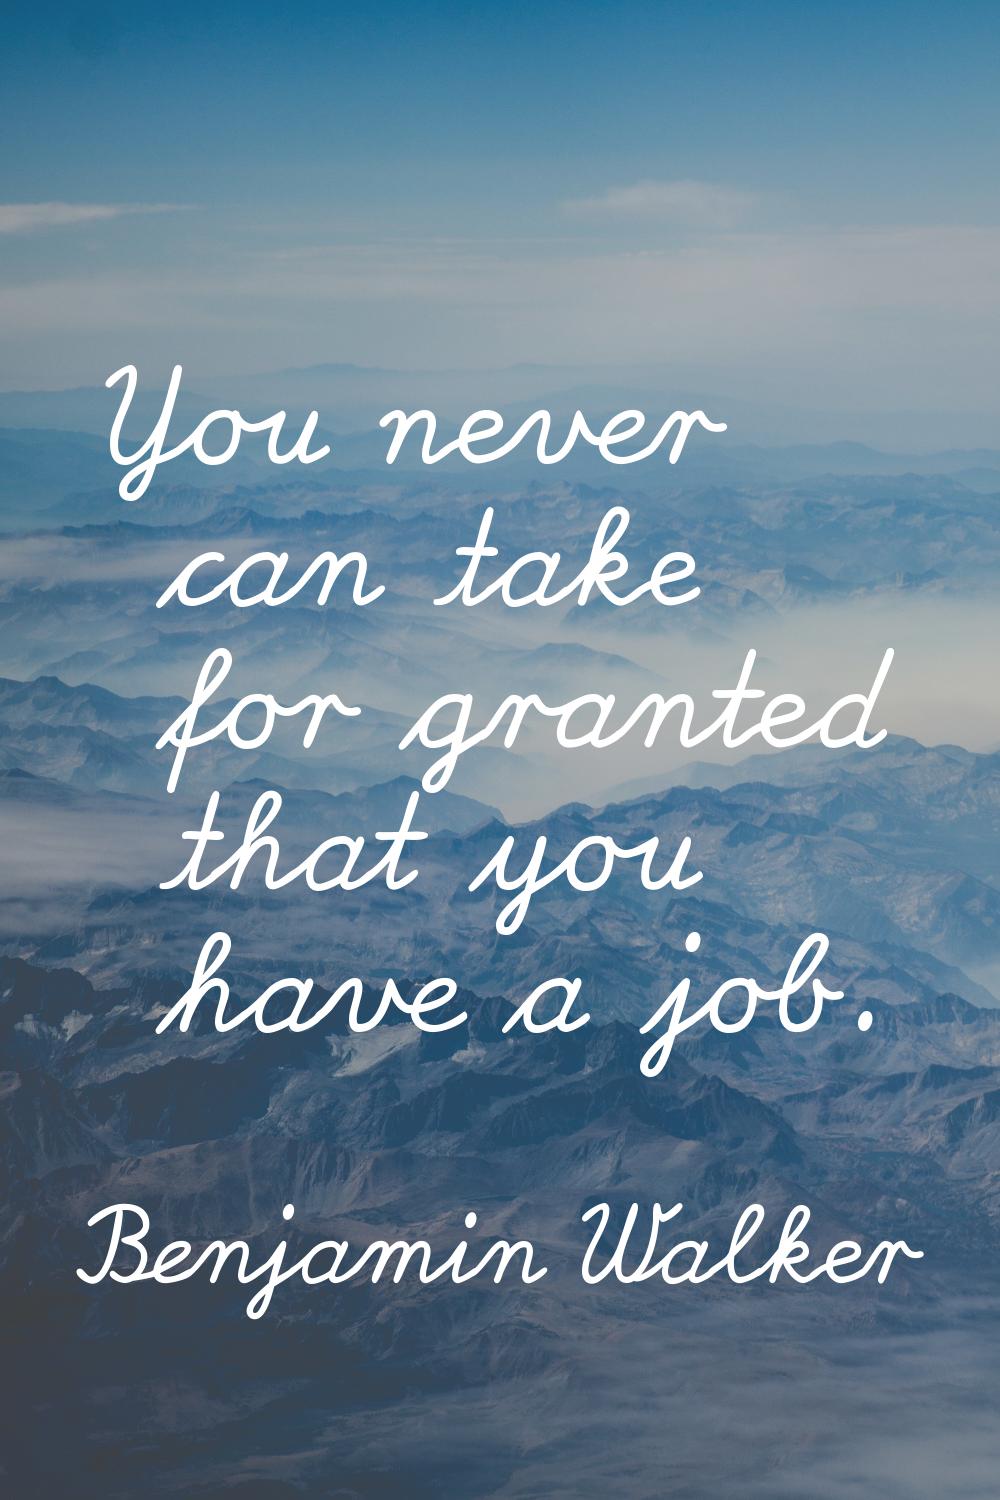 You never can take for granted that you have a job.